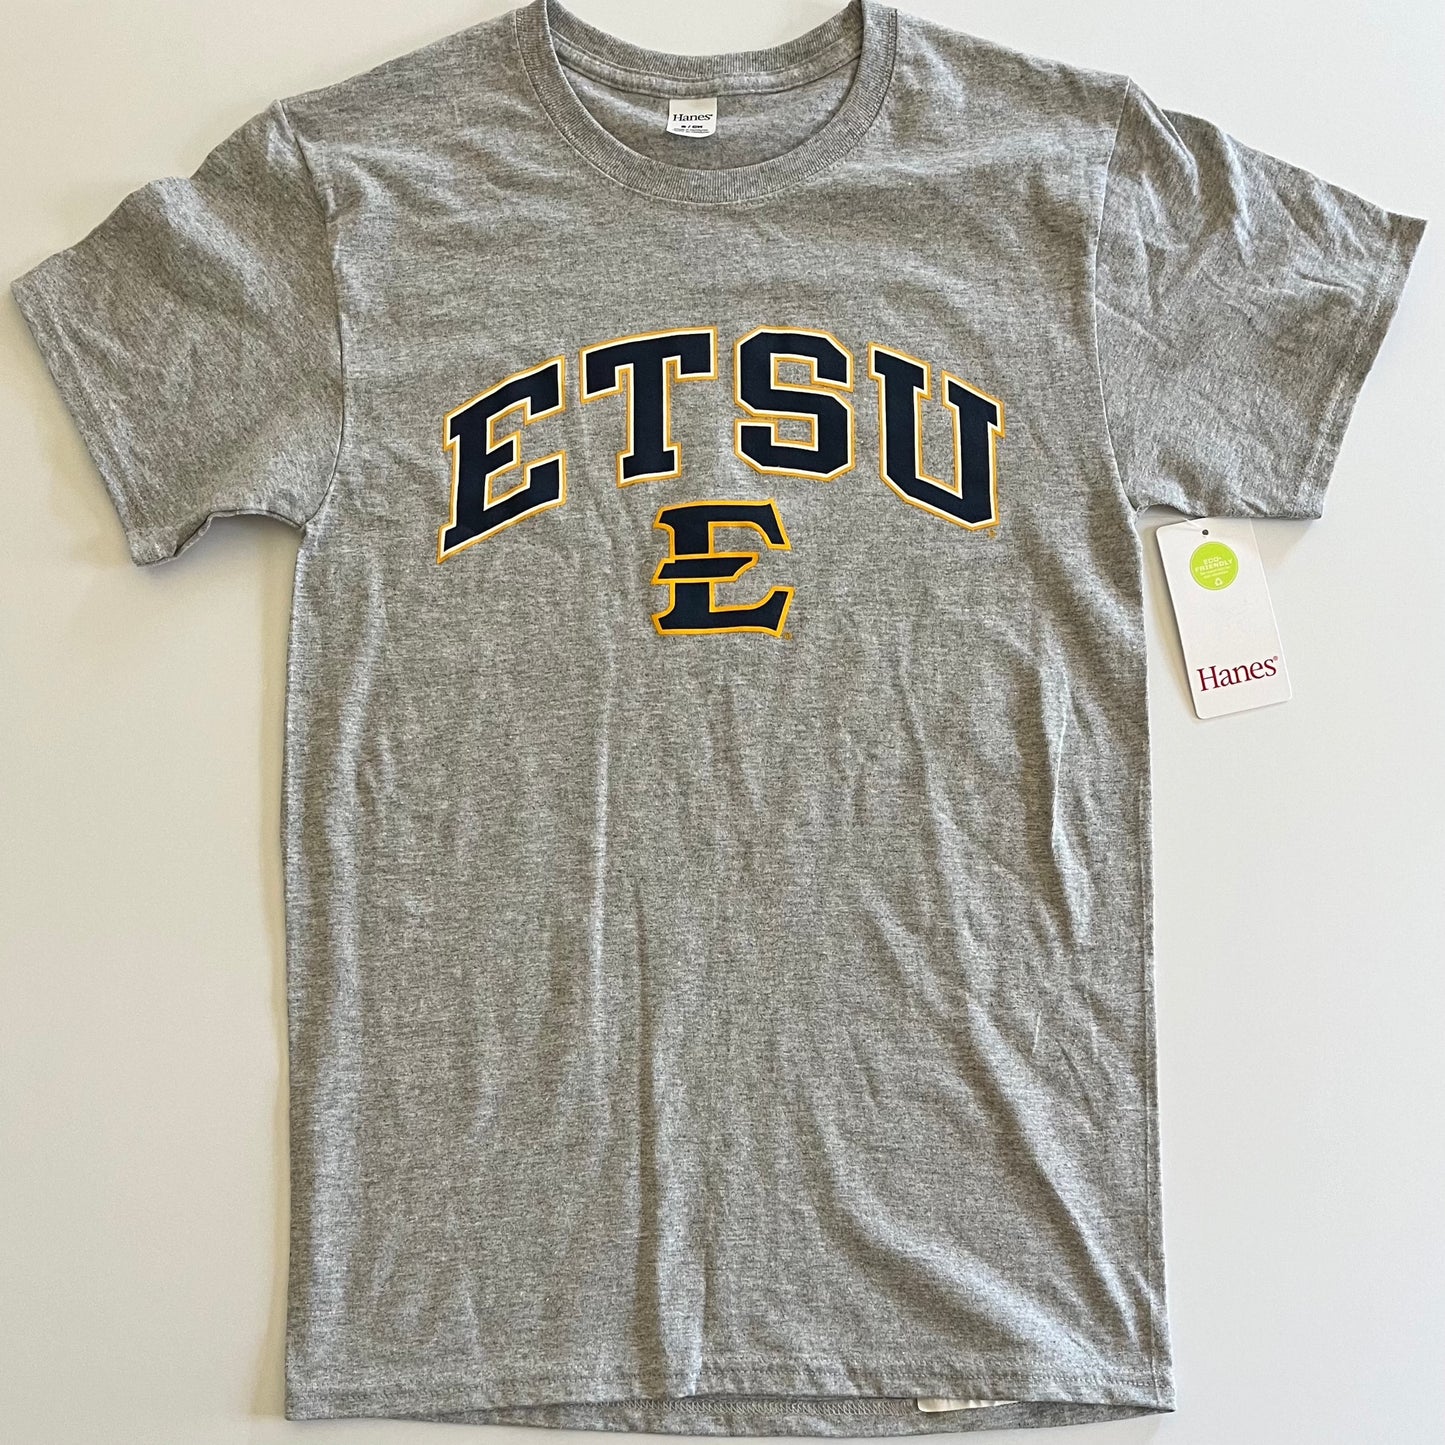 East Tennessee State University - Hanes Tee (Small)